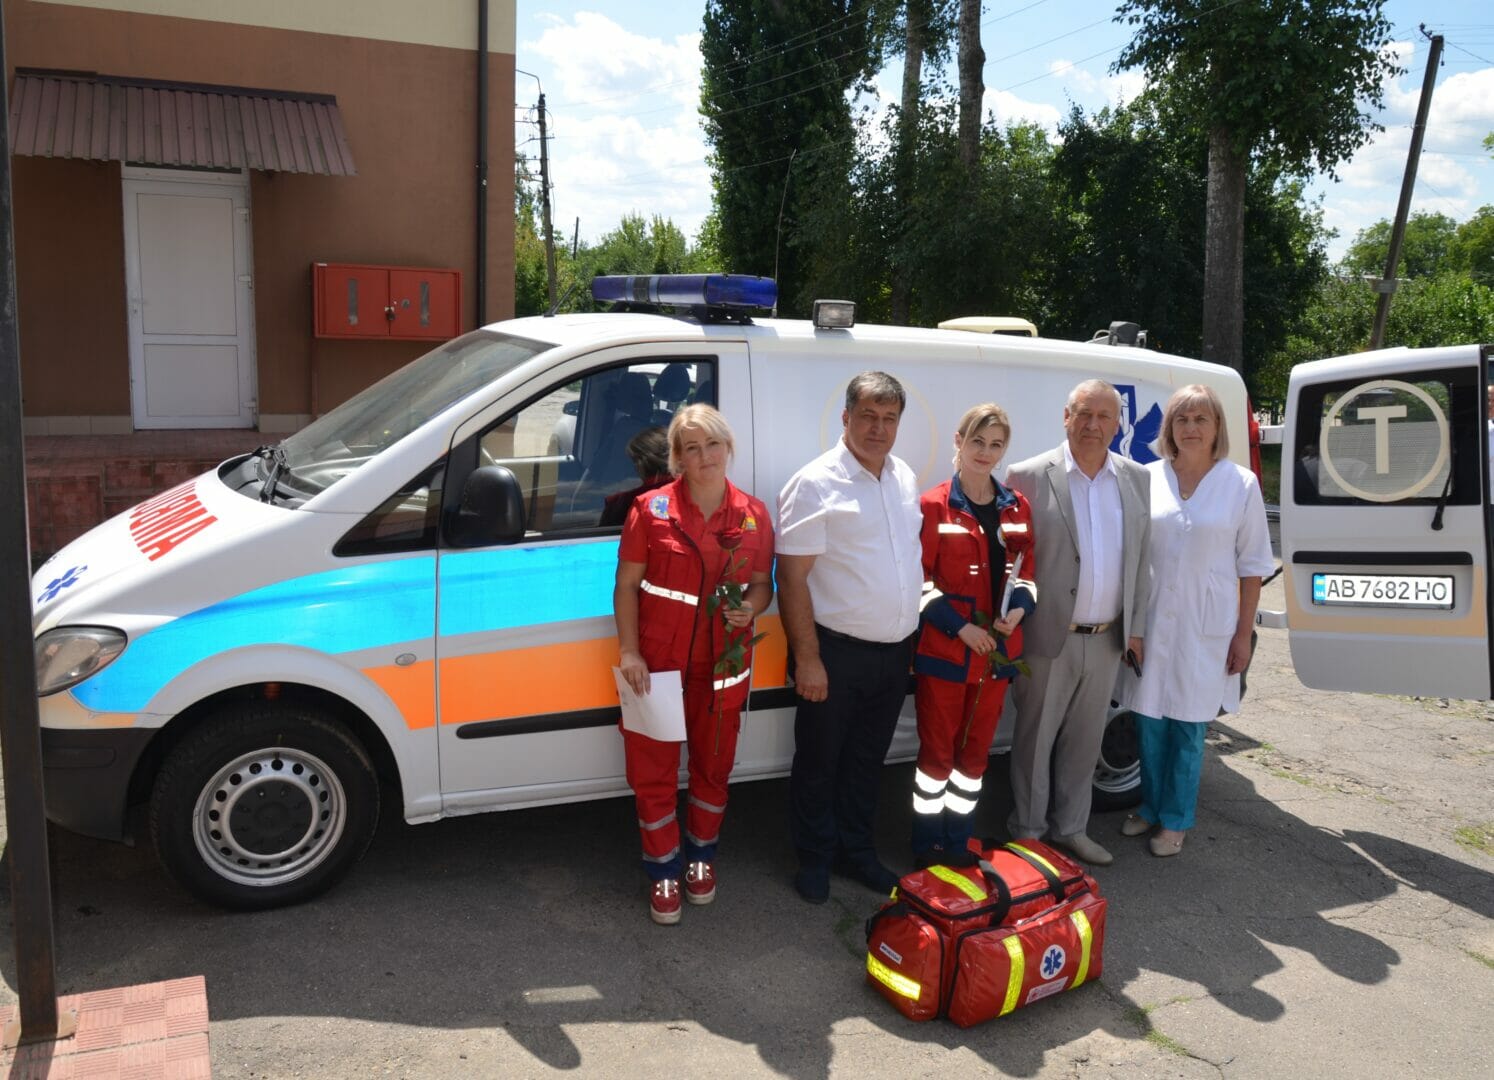 The ambulance from Wolshtyn will be used by the Lityn hospital